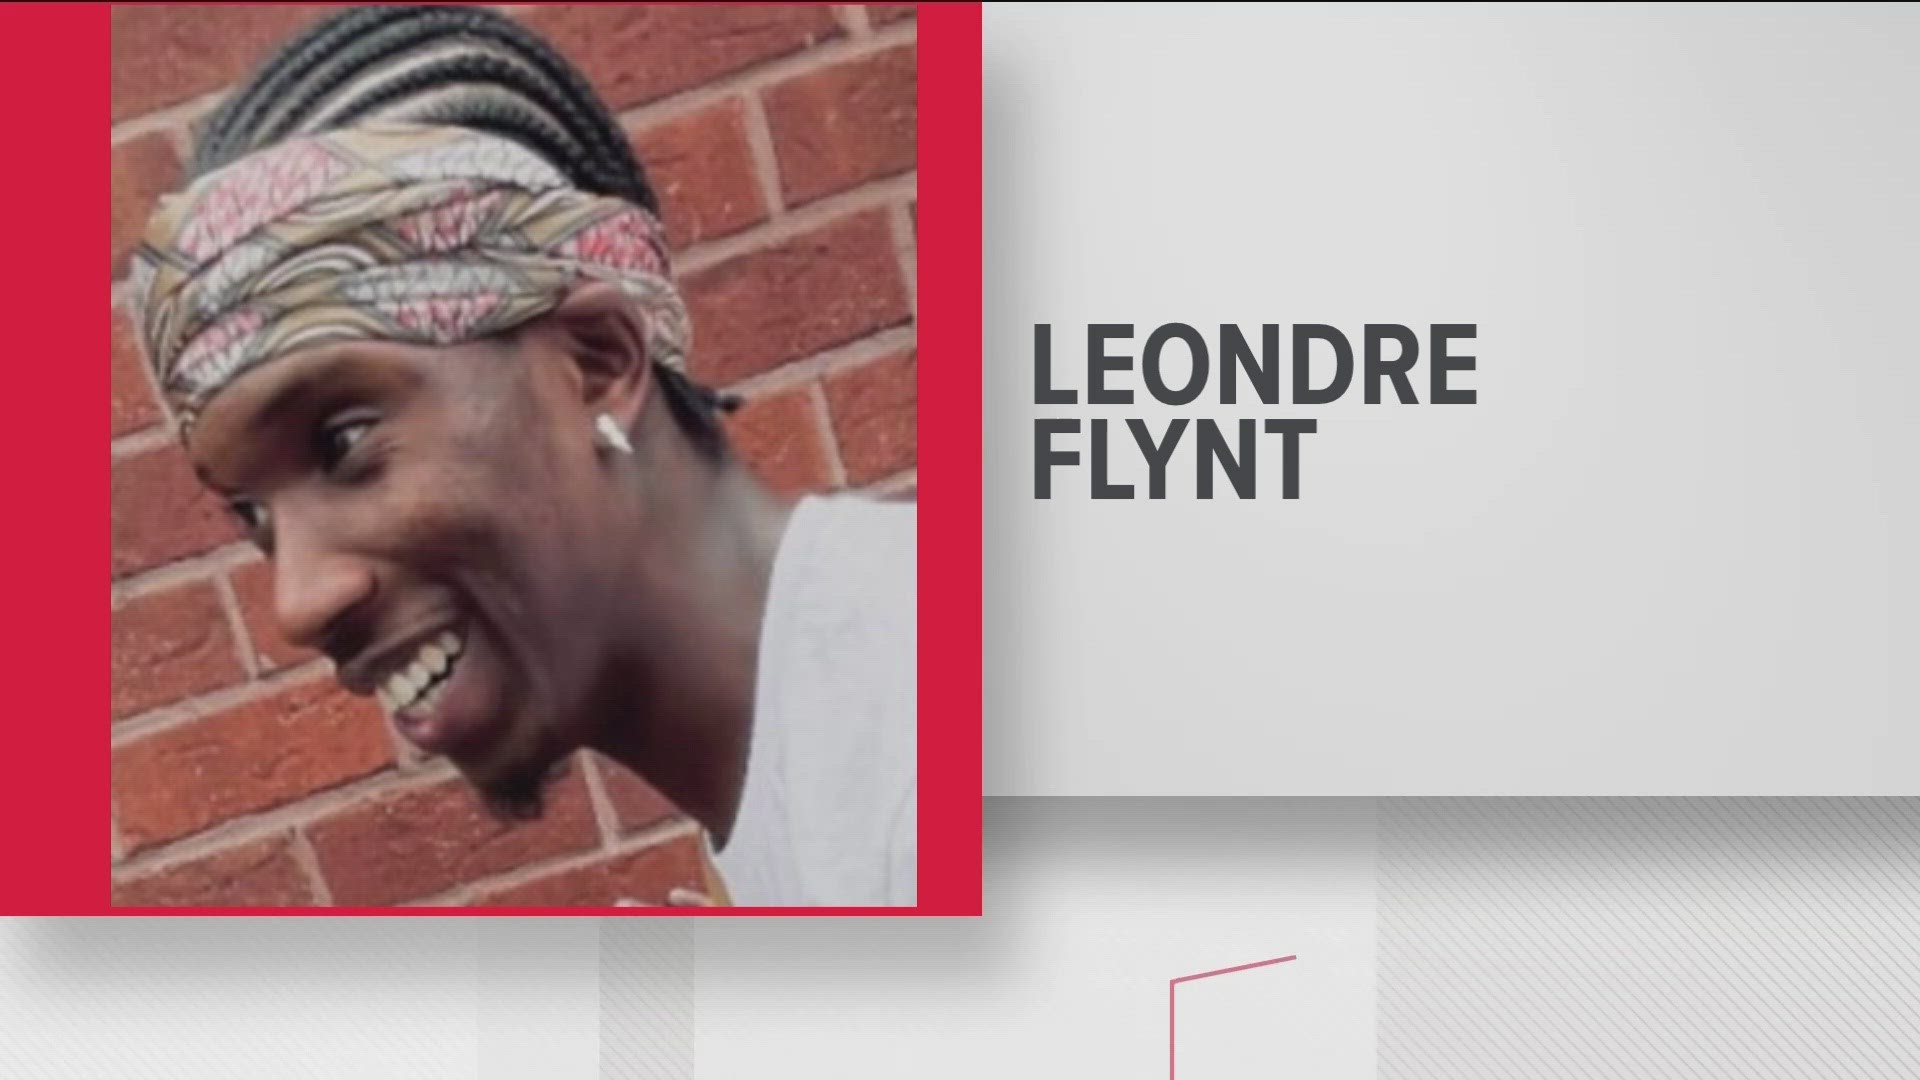 Leondre Flynt's brother is desperately trying to find him after he disappeared from his Loganville home on July 29.